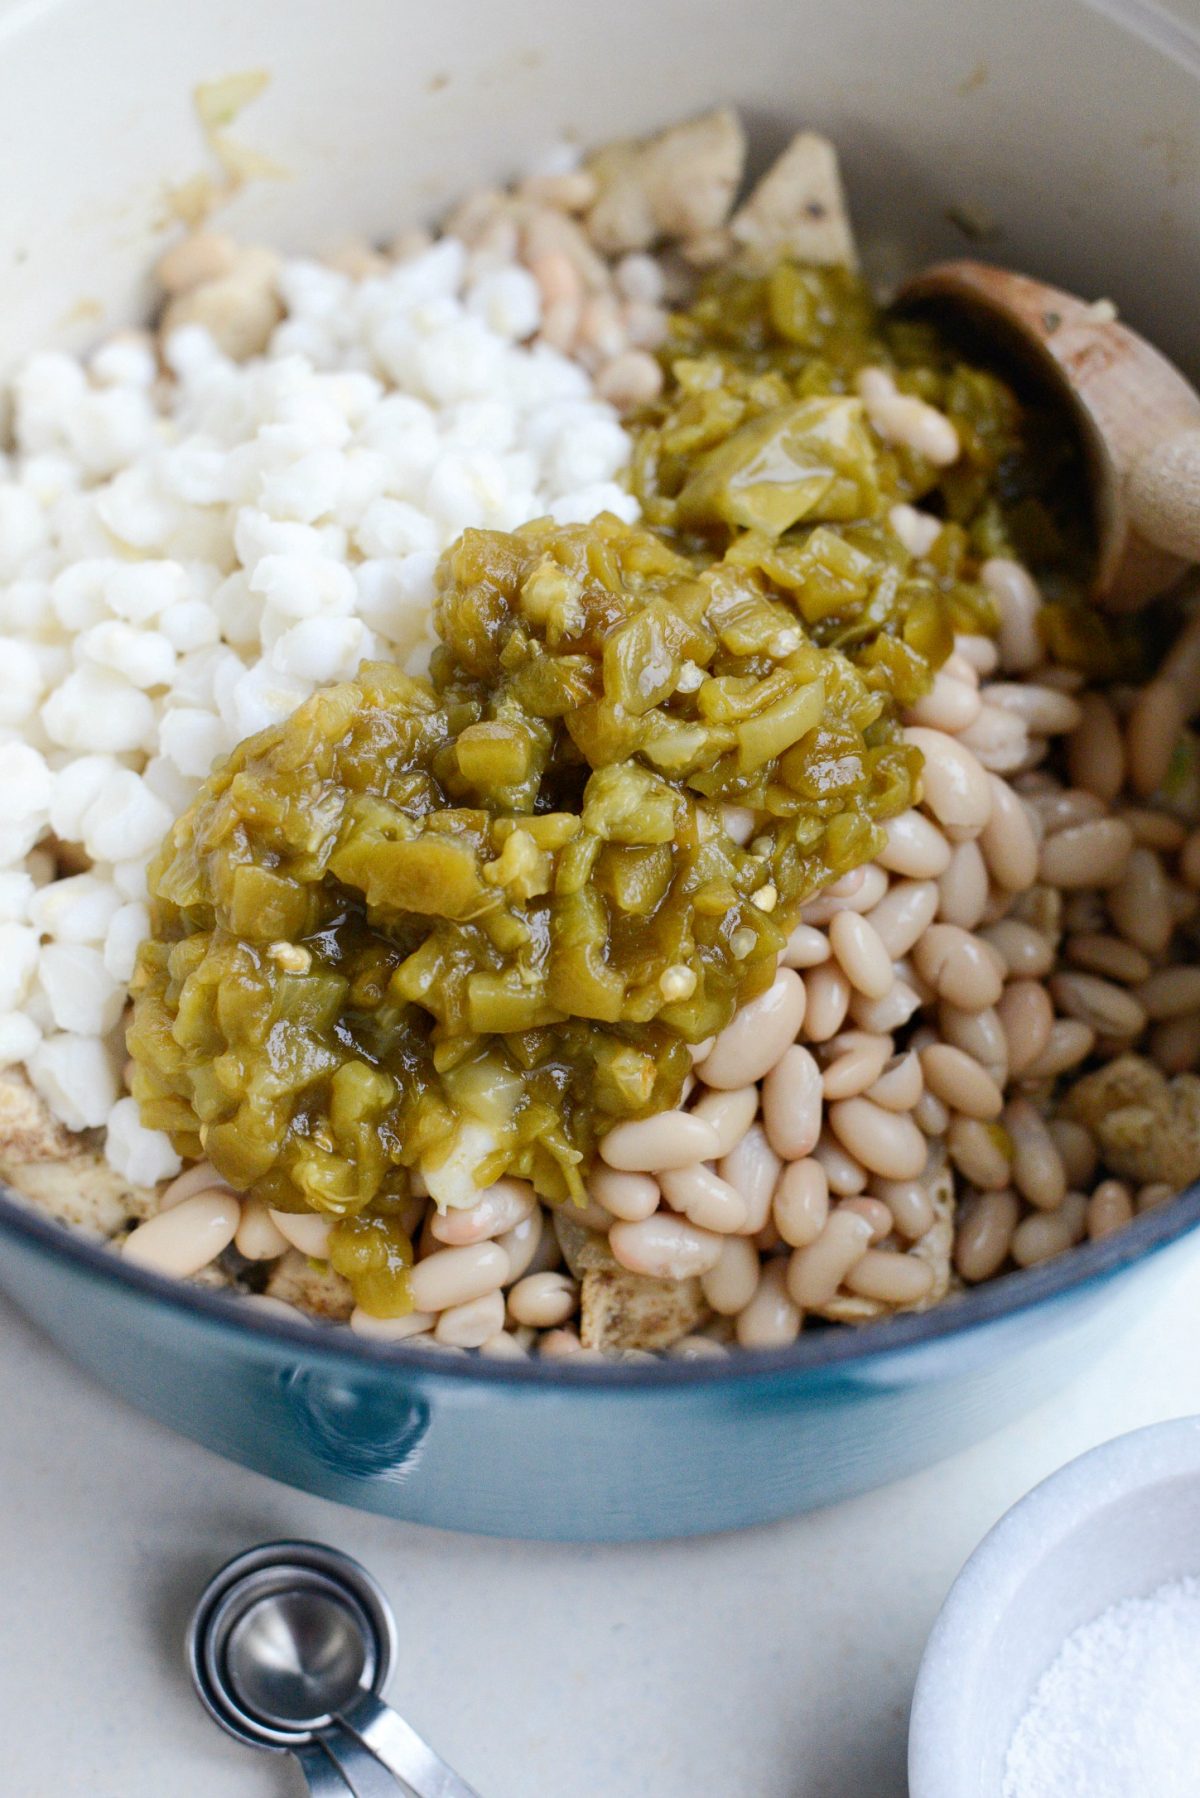 Add in hominy, beans and diced green chiles.